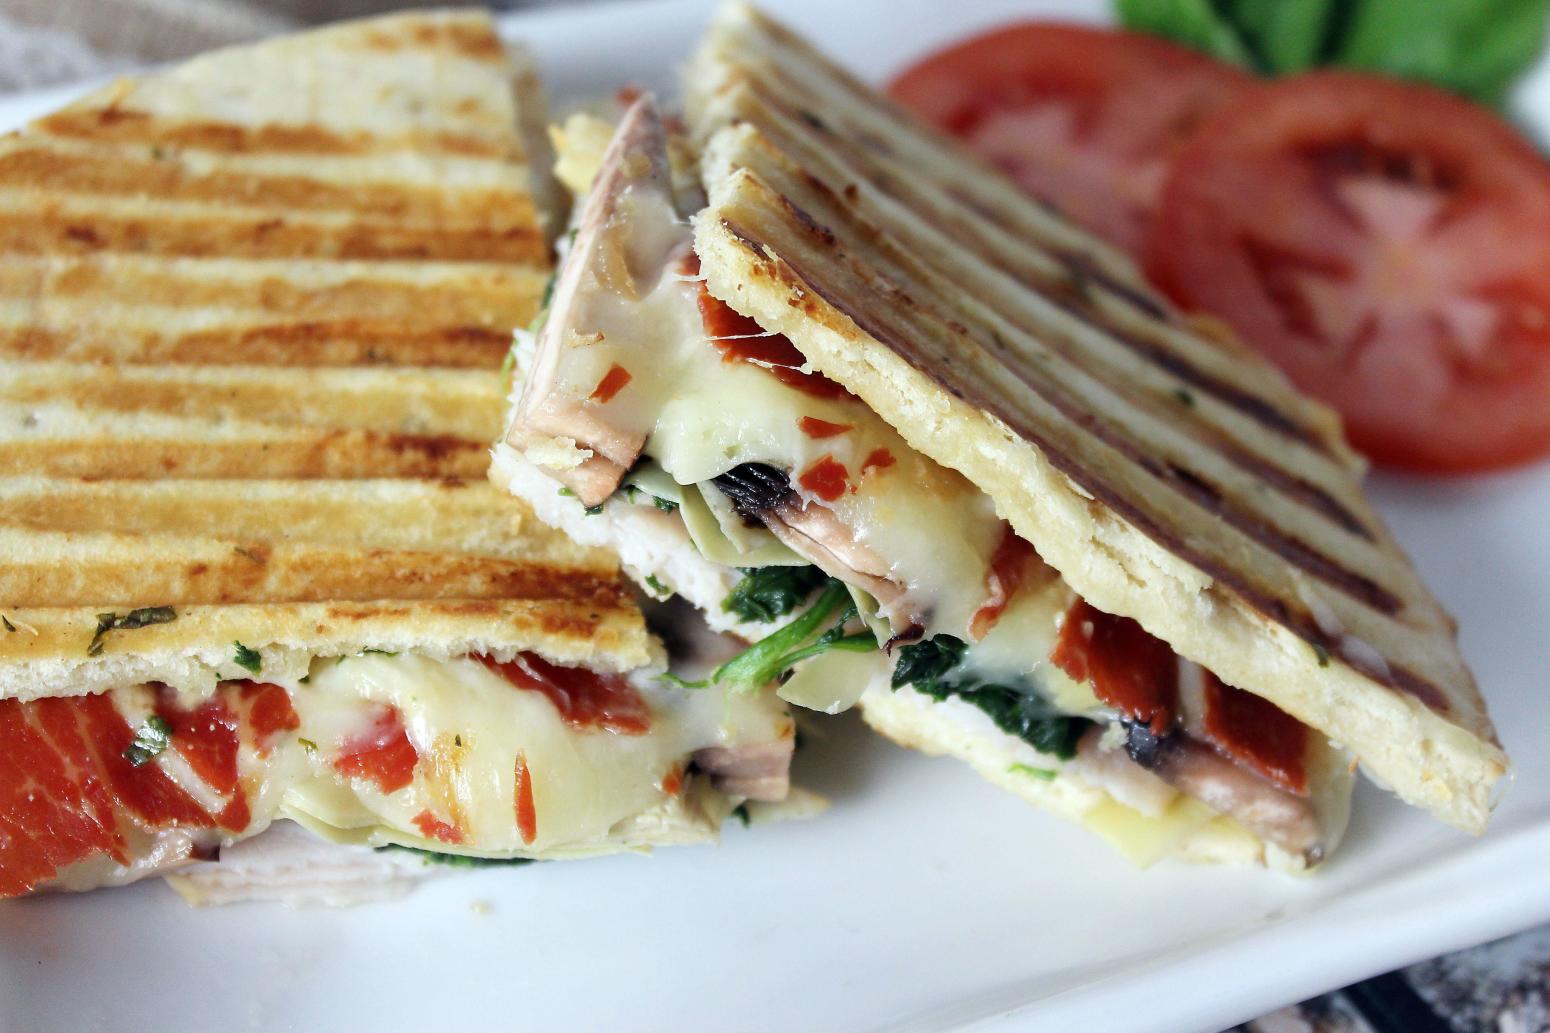 Gourmet Sandwich Recipes for Lunch or Dinner